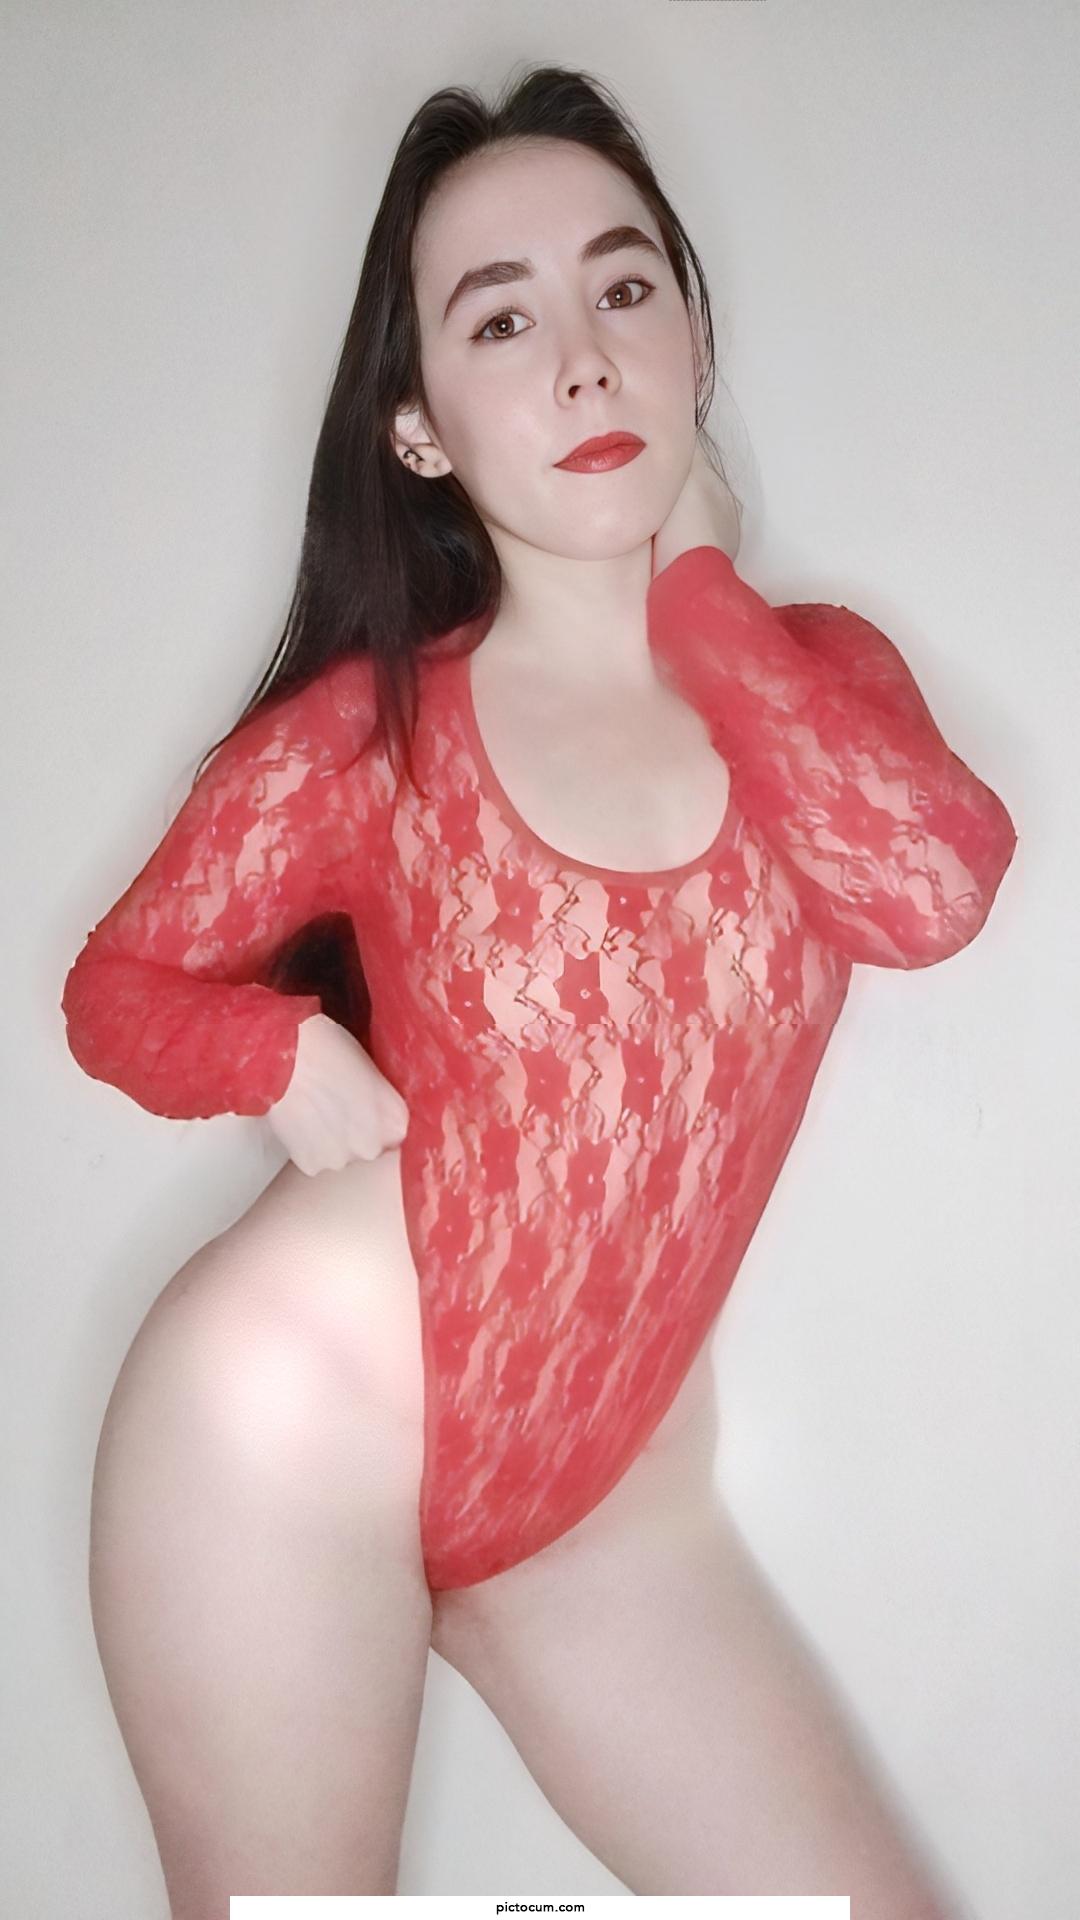 DOES RED BODYSUIT LOOKS GOOD ON ME?